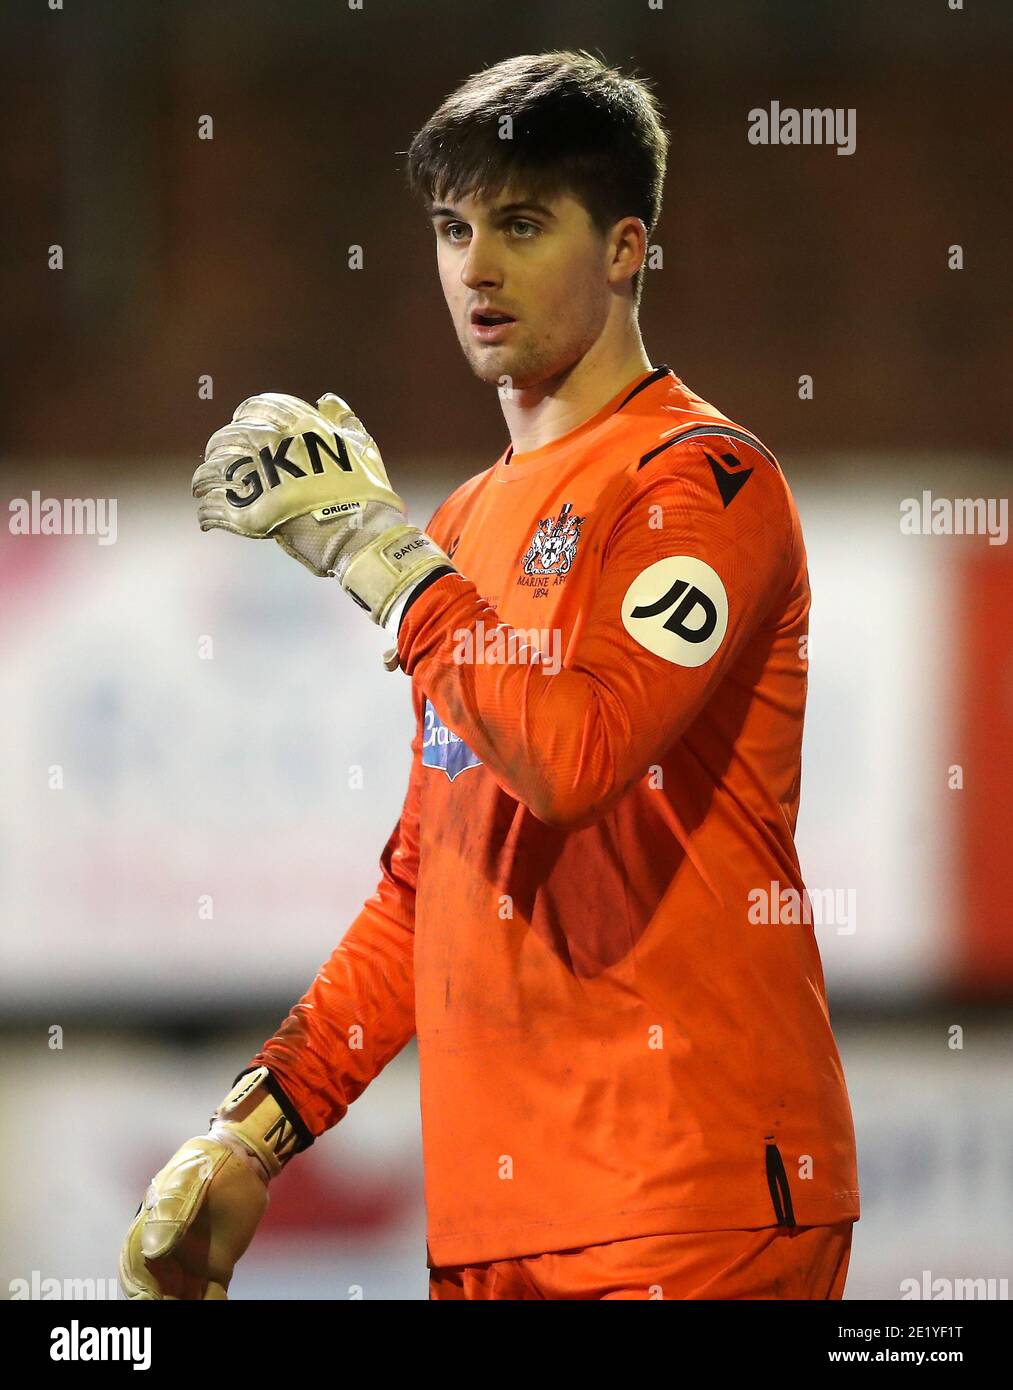 Marine goalkeeper Bayleigh Passant during the Emirates FA Cup third round match at Rossett Park, Crosby. Stock Photo